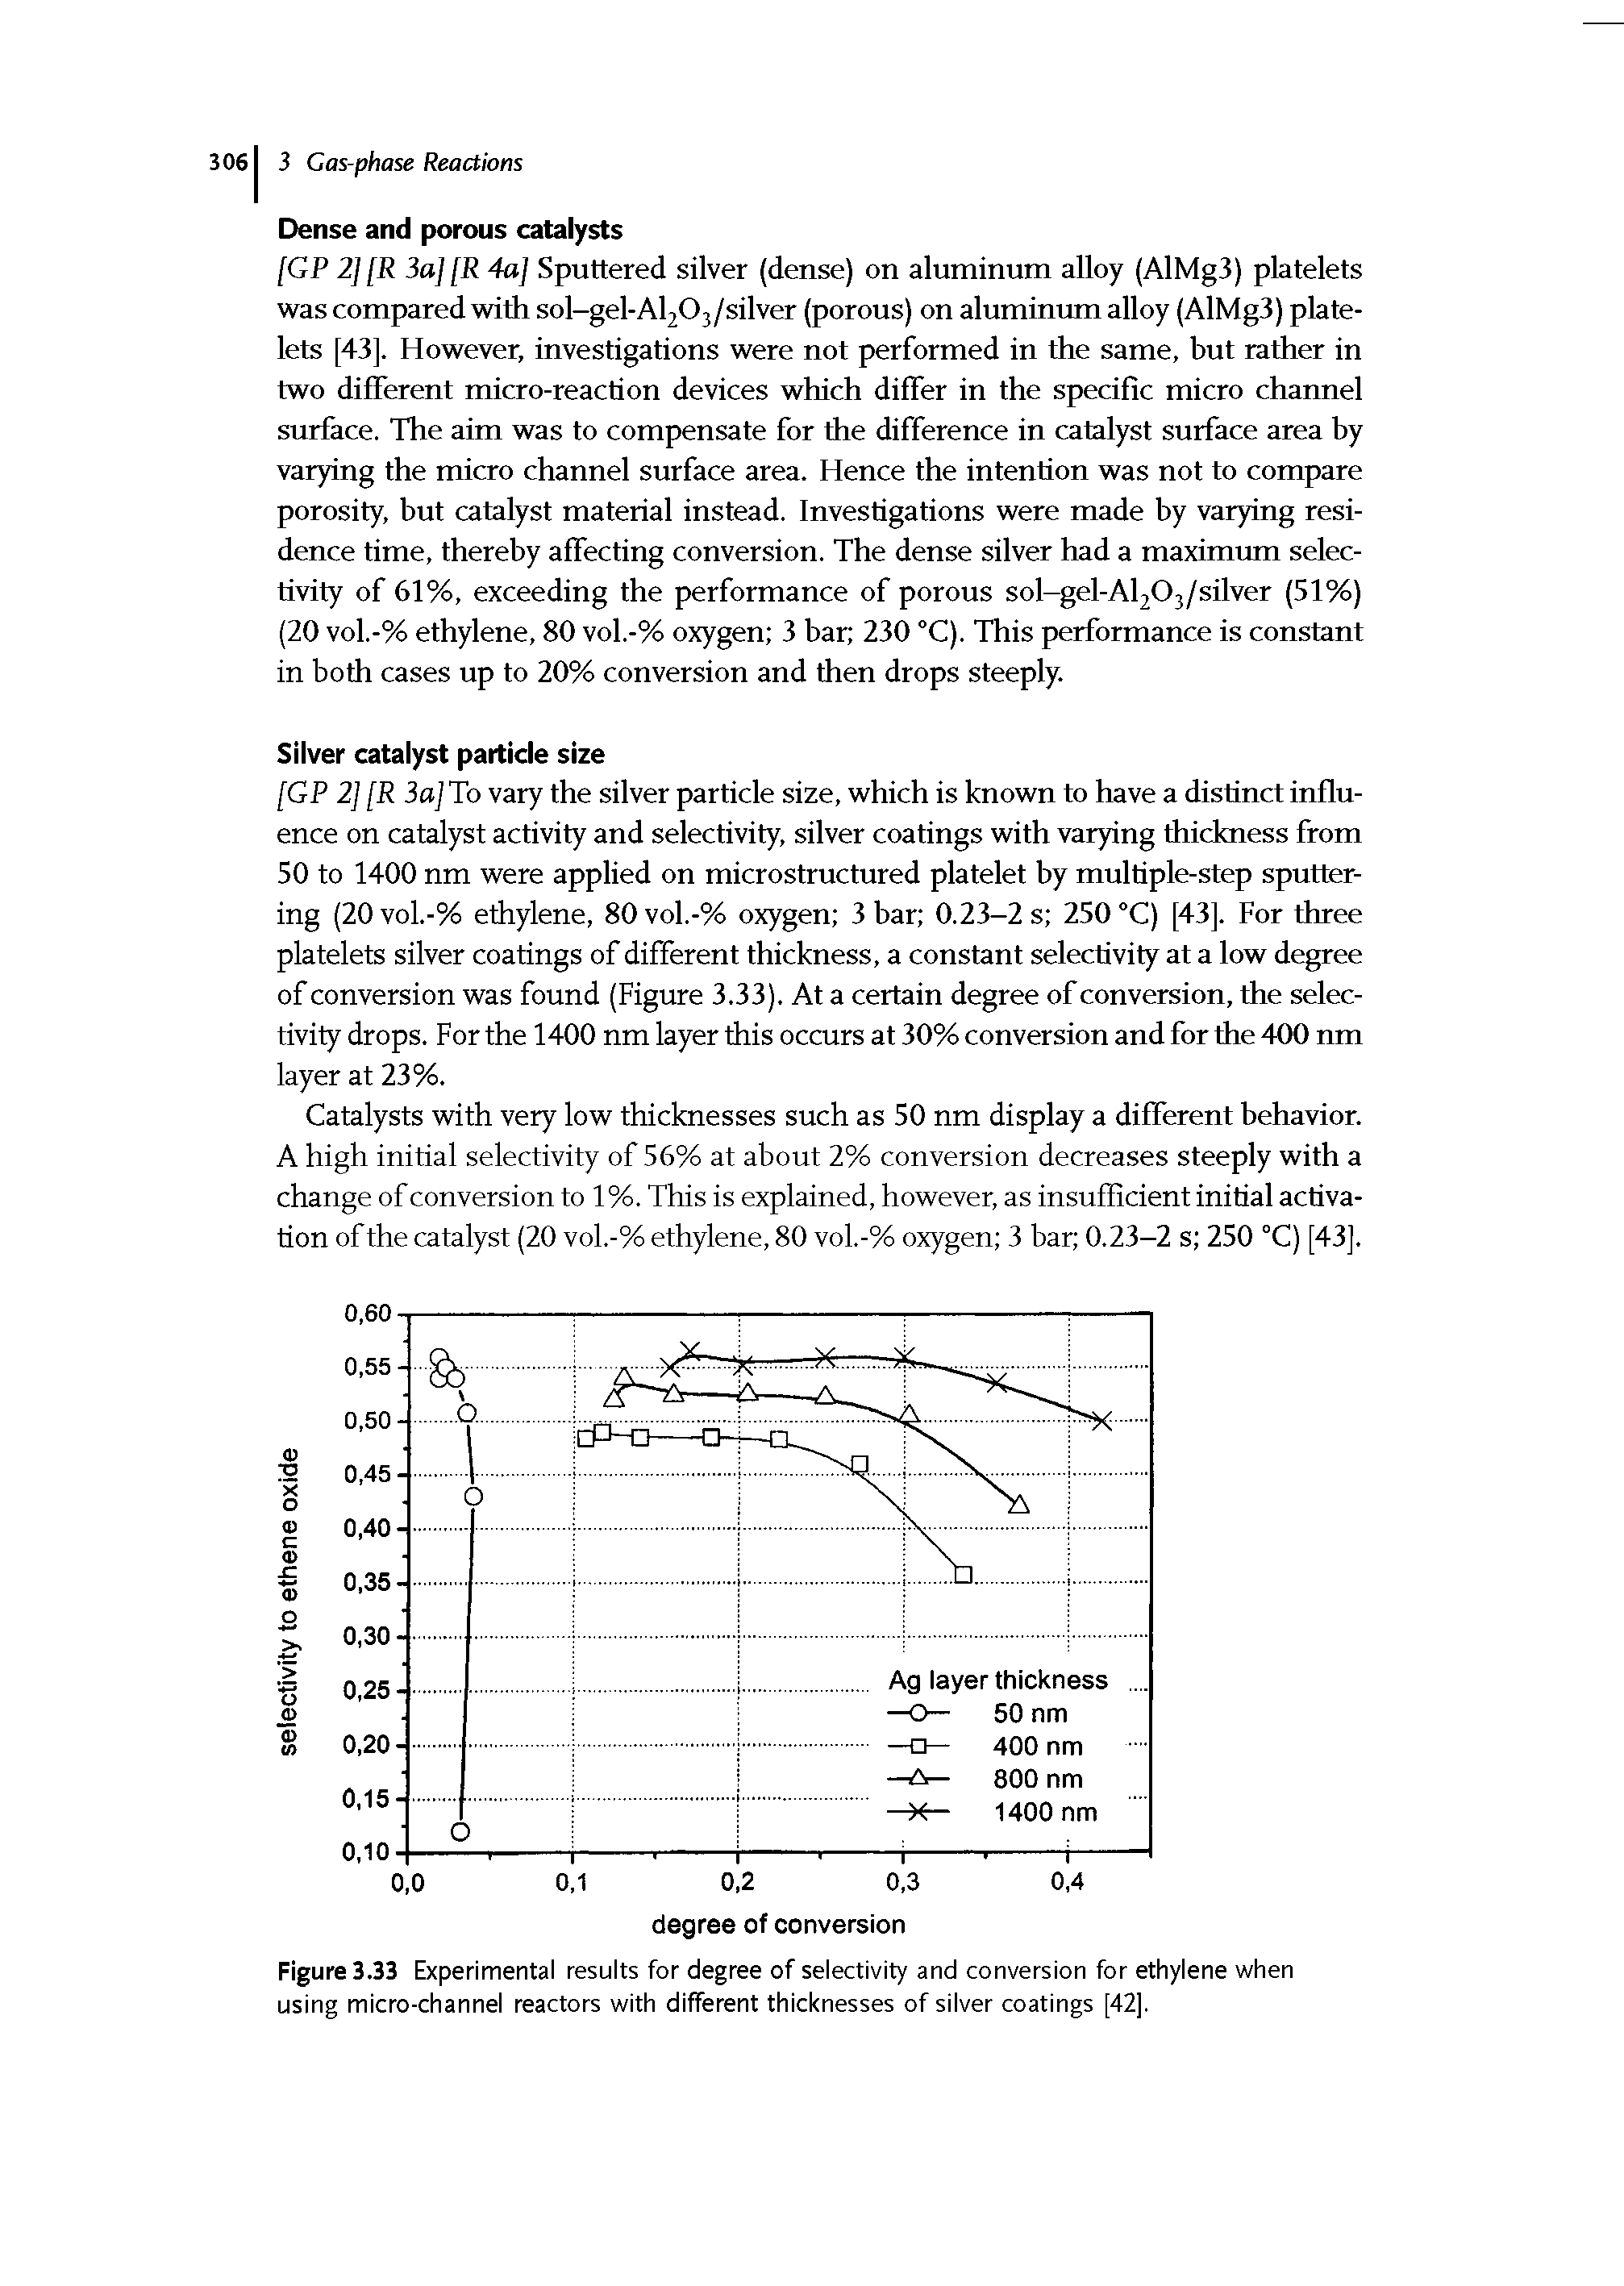 Figure 3.33 Experimental results for degree of selectivity and conversion for ethylene when using micro-channel reactors with different thicknesses of silver coatings [42].